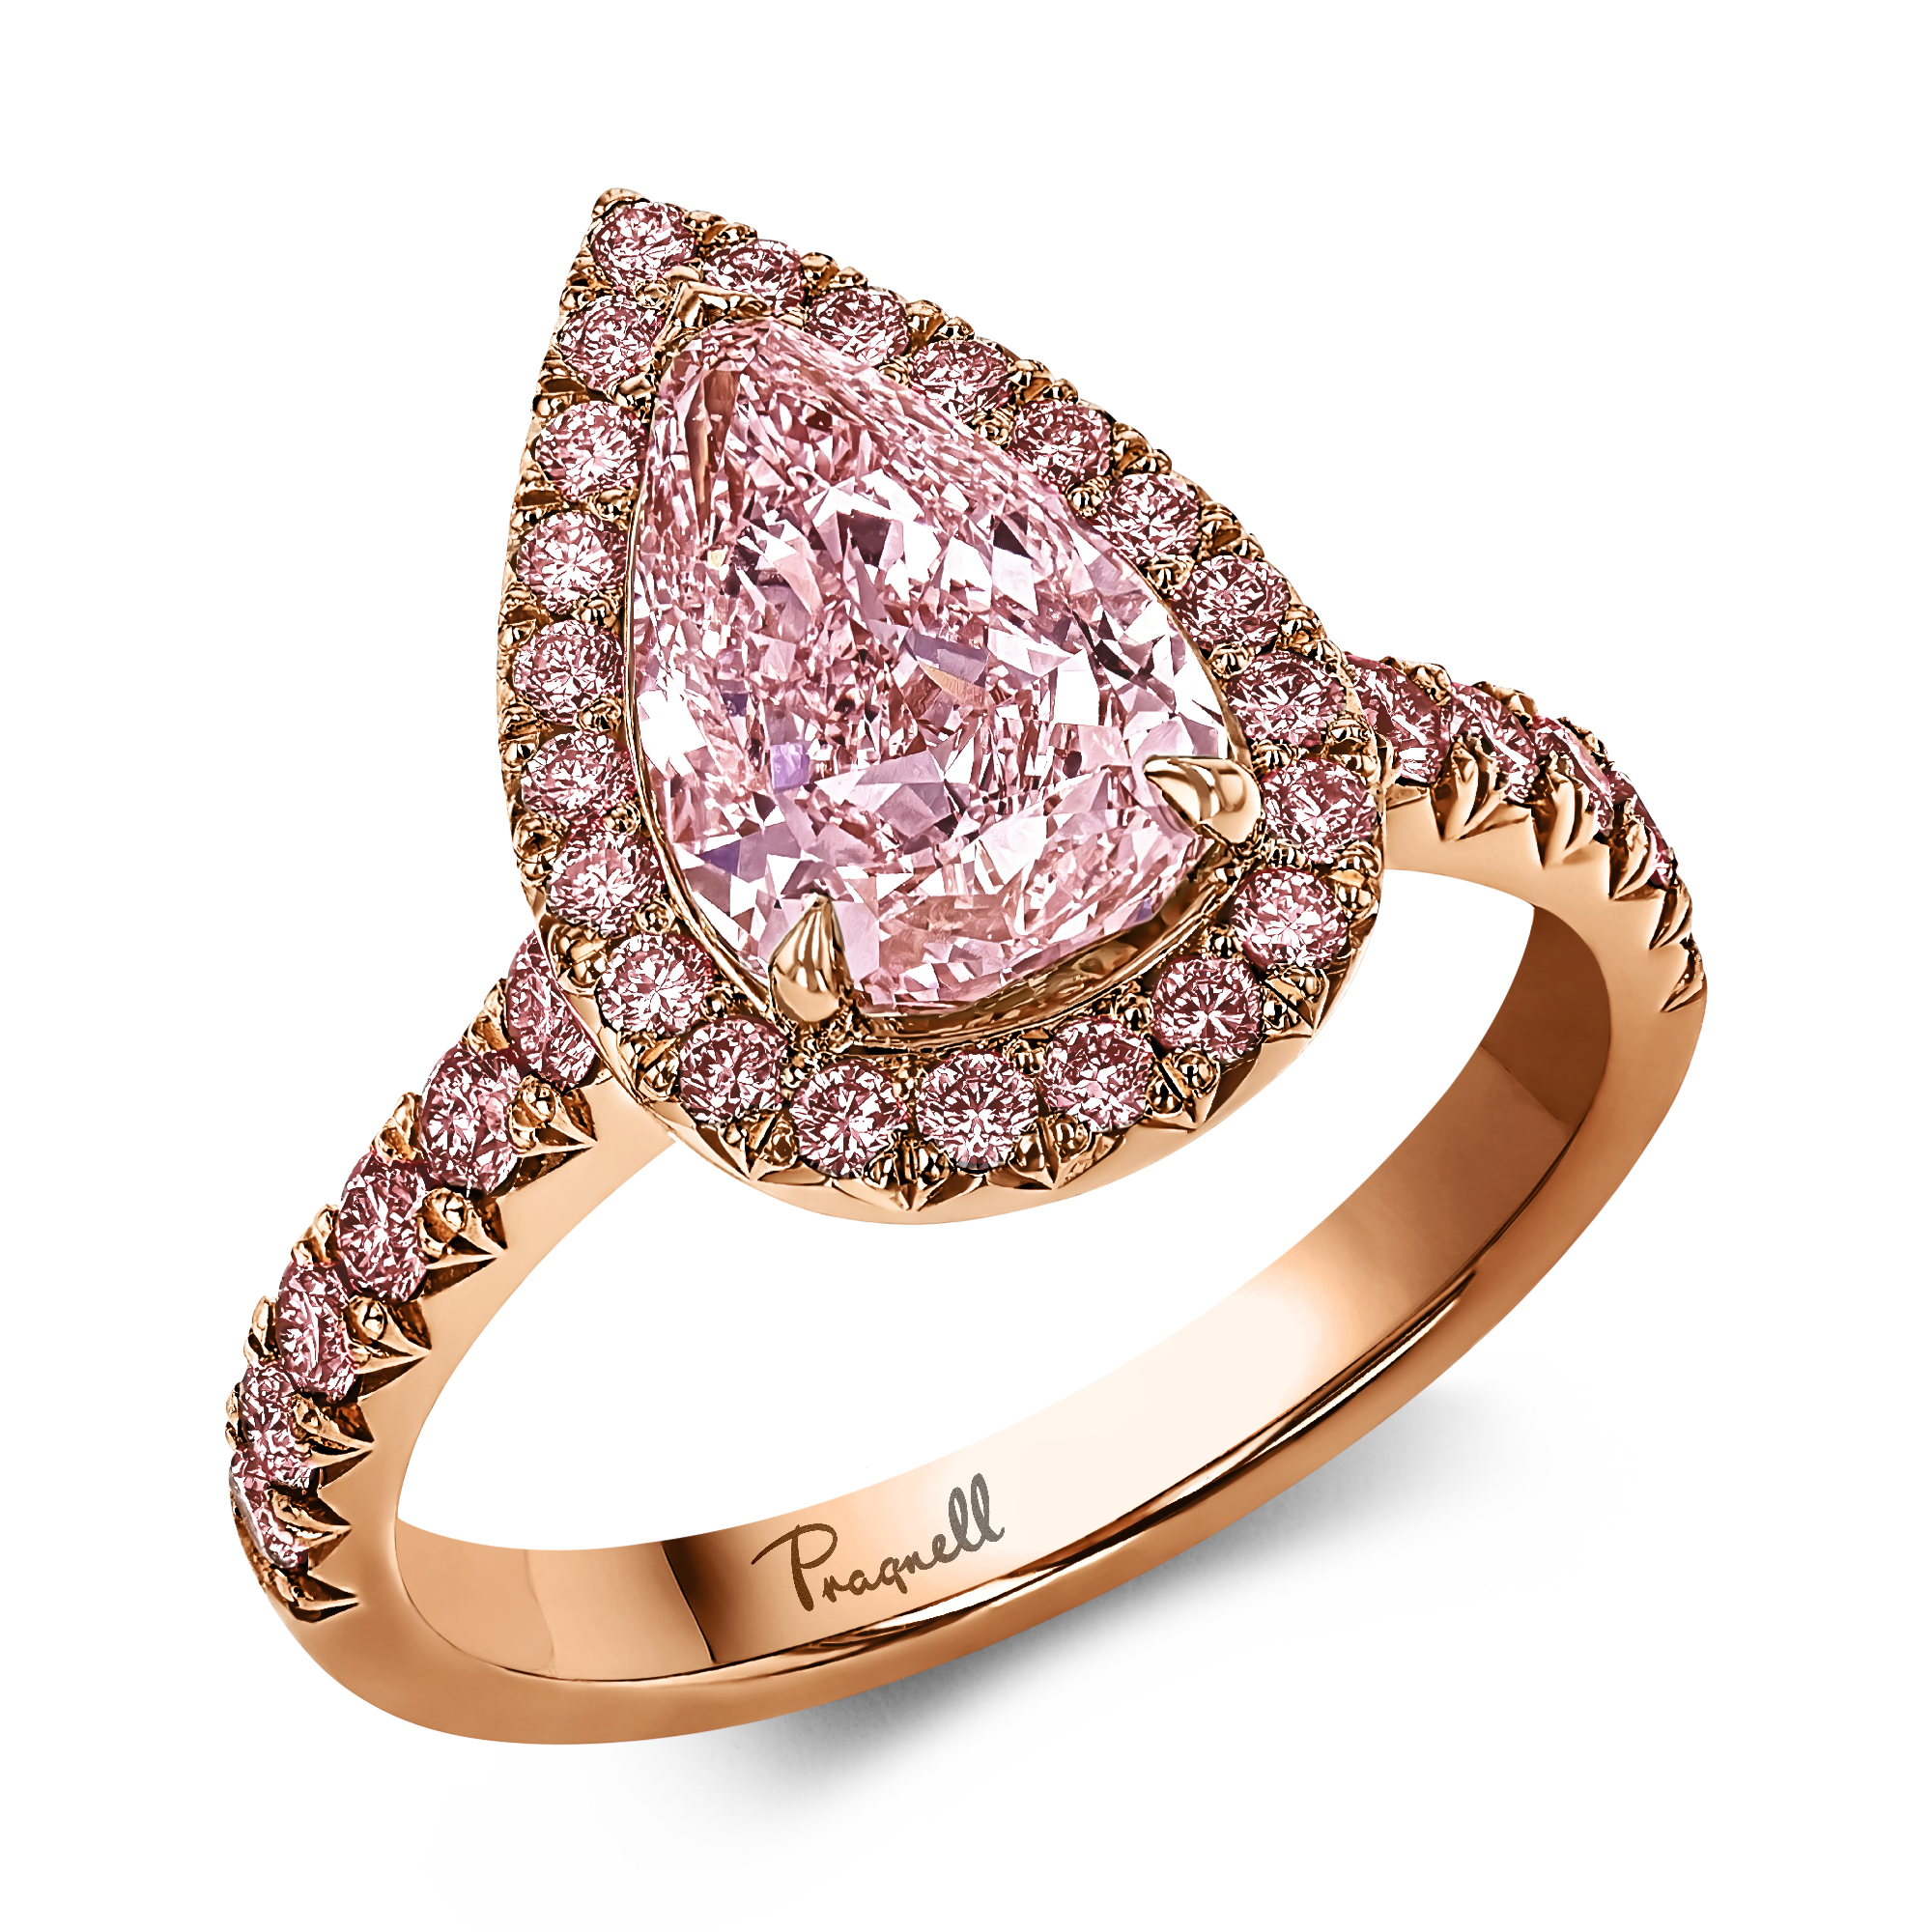 Masterpiece Celestial 2.01ct Pearshape Light Pink Diamond Cluster Ring Pearshape, Claw Set_1